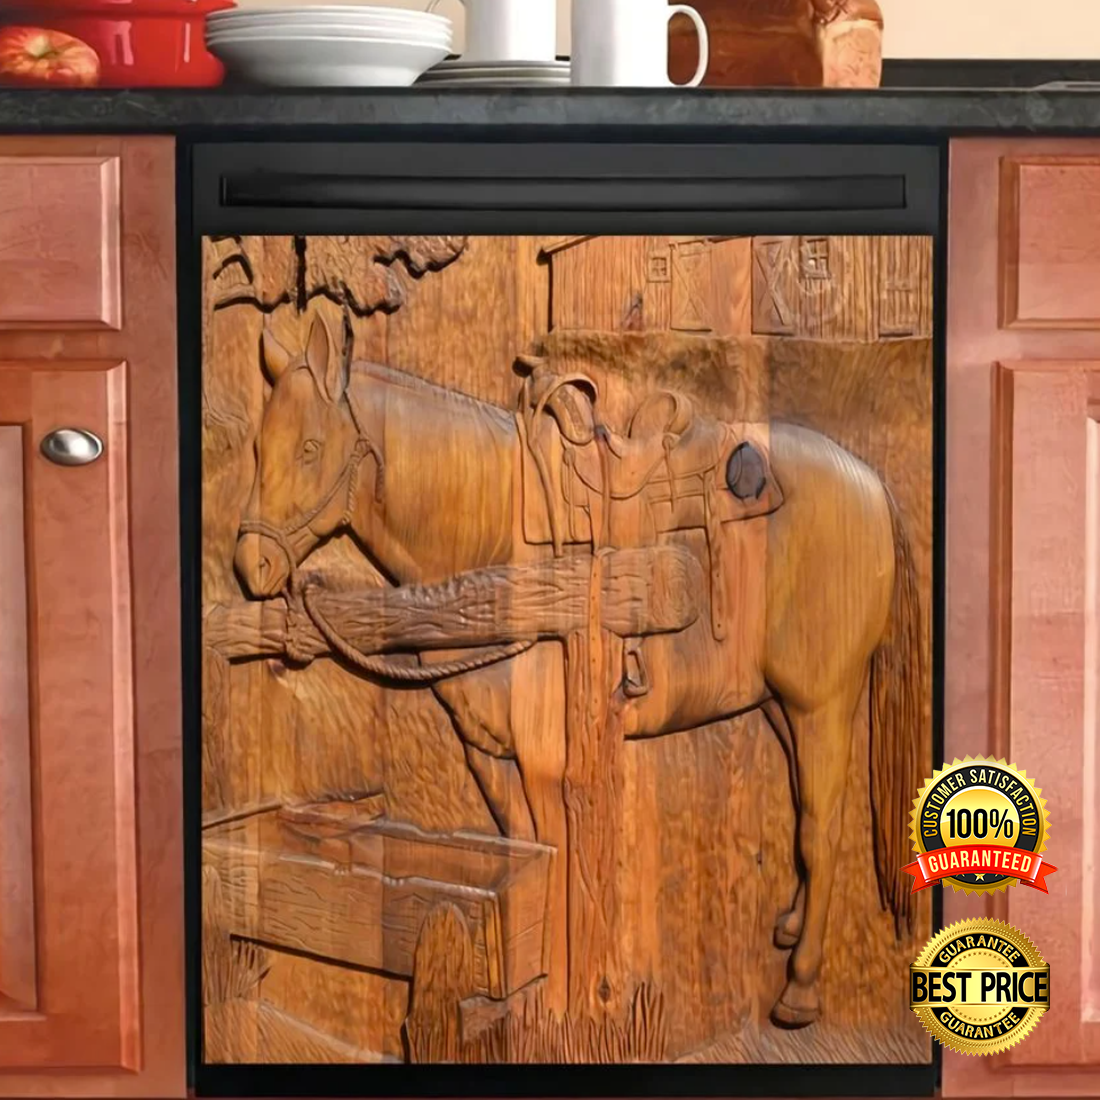 Wooden horse dishwasher cover 4